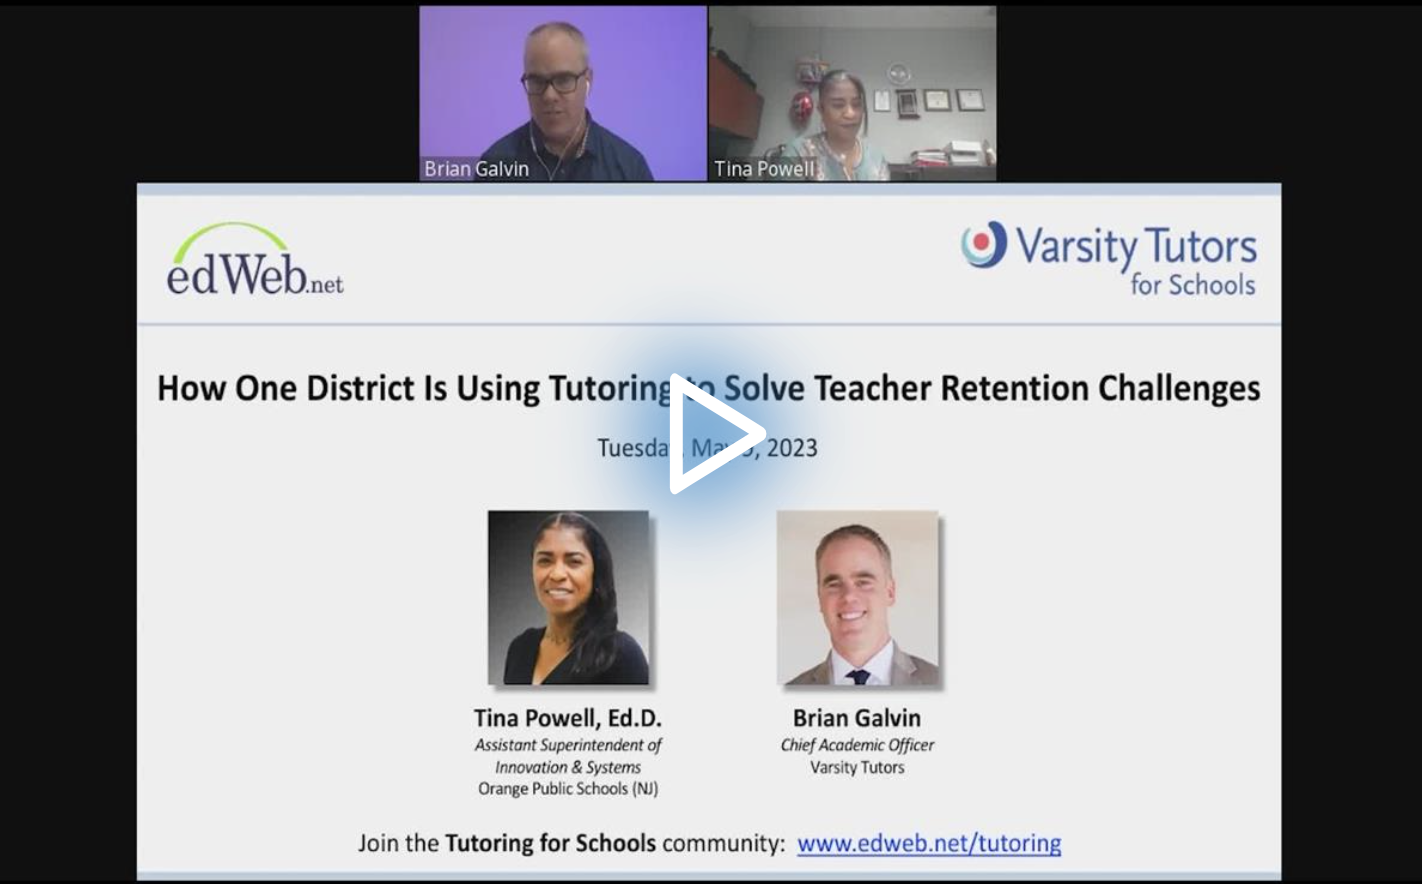 How One District Is Using Tutoring to Solve Teacher Retention Challenges edLeader Panel recording screenshot